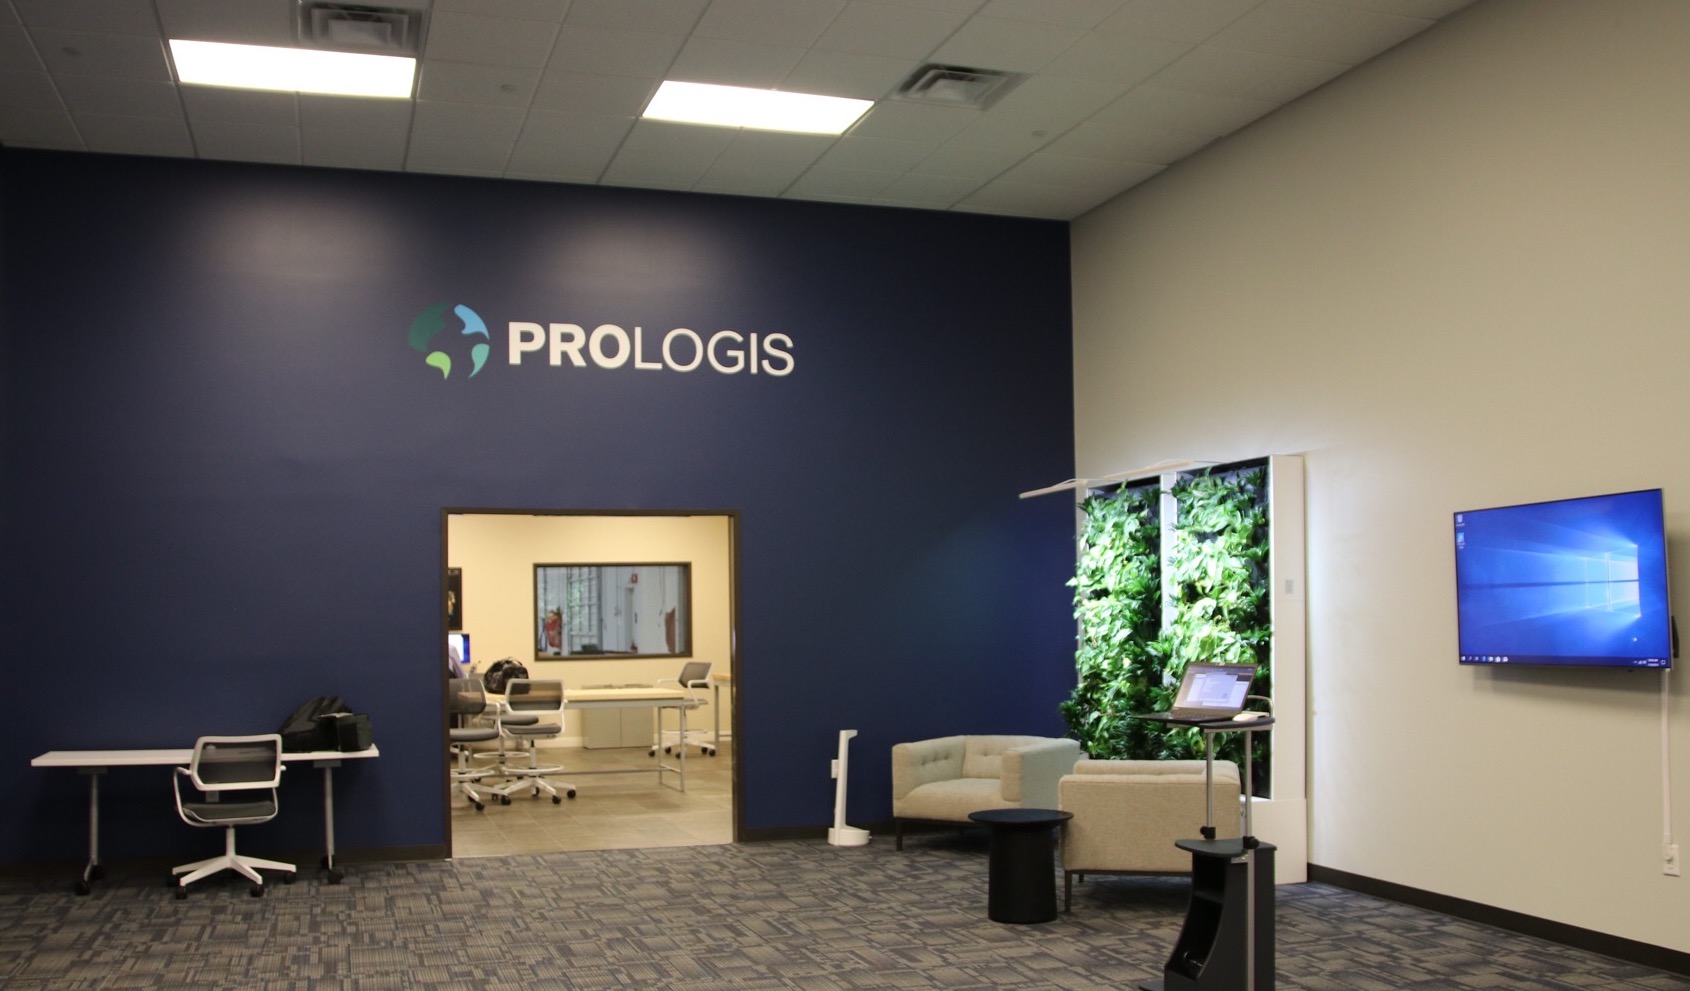 An image shows the interior of the Prologis Labs facility with a reception area and work space.